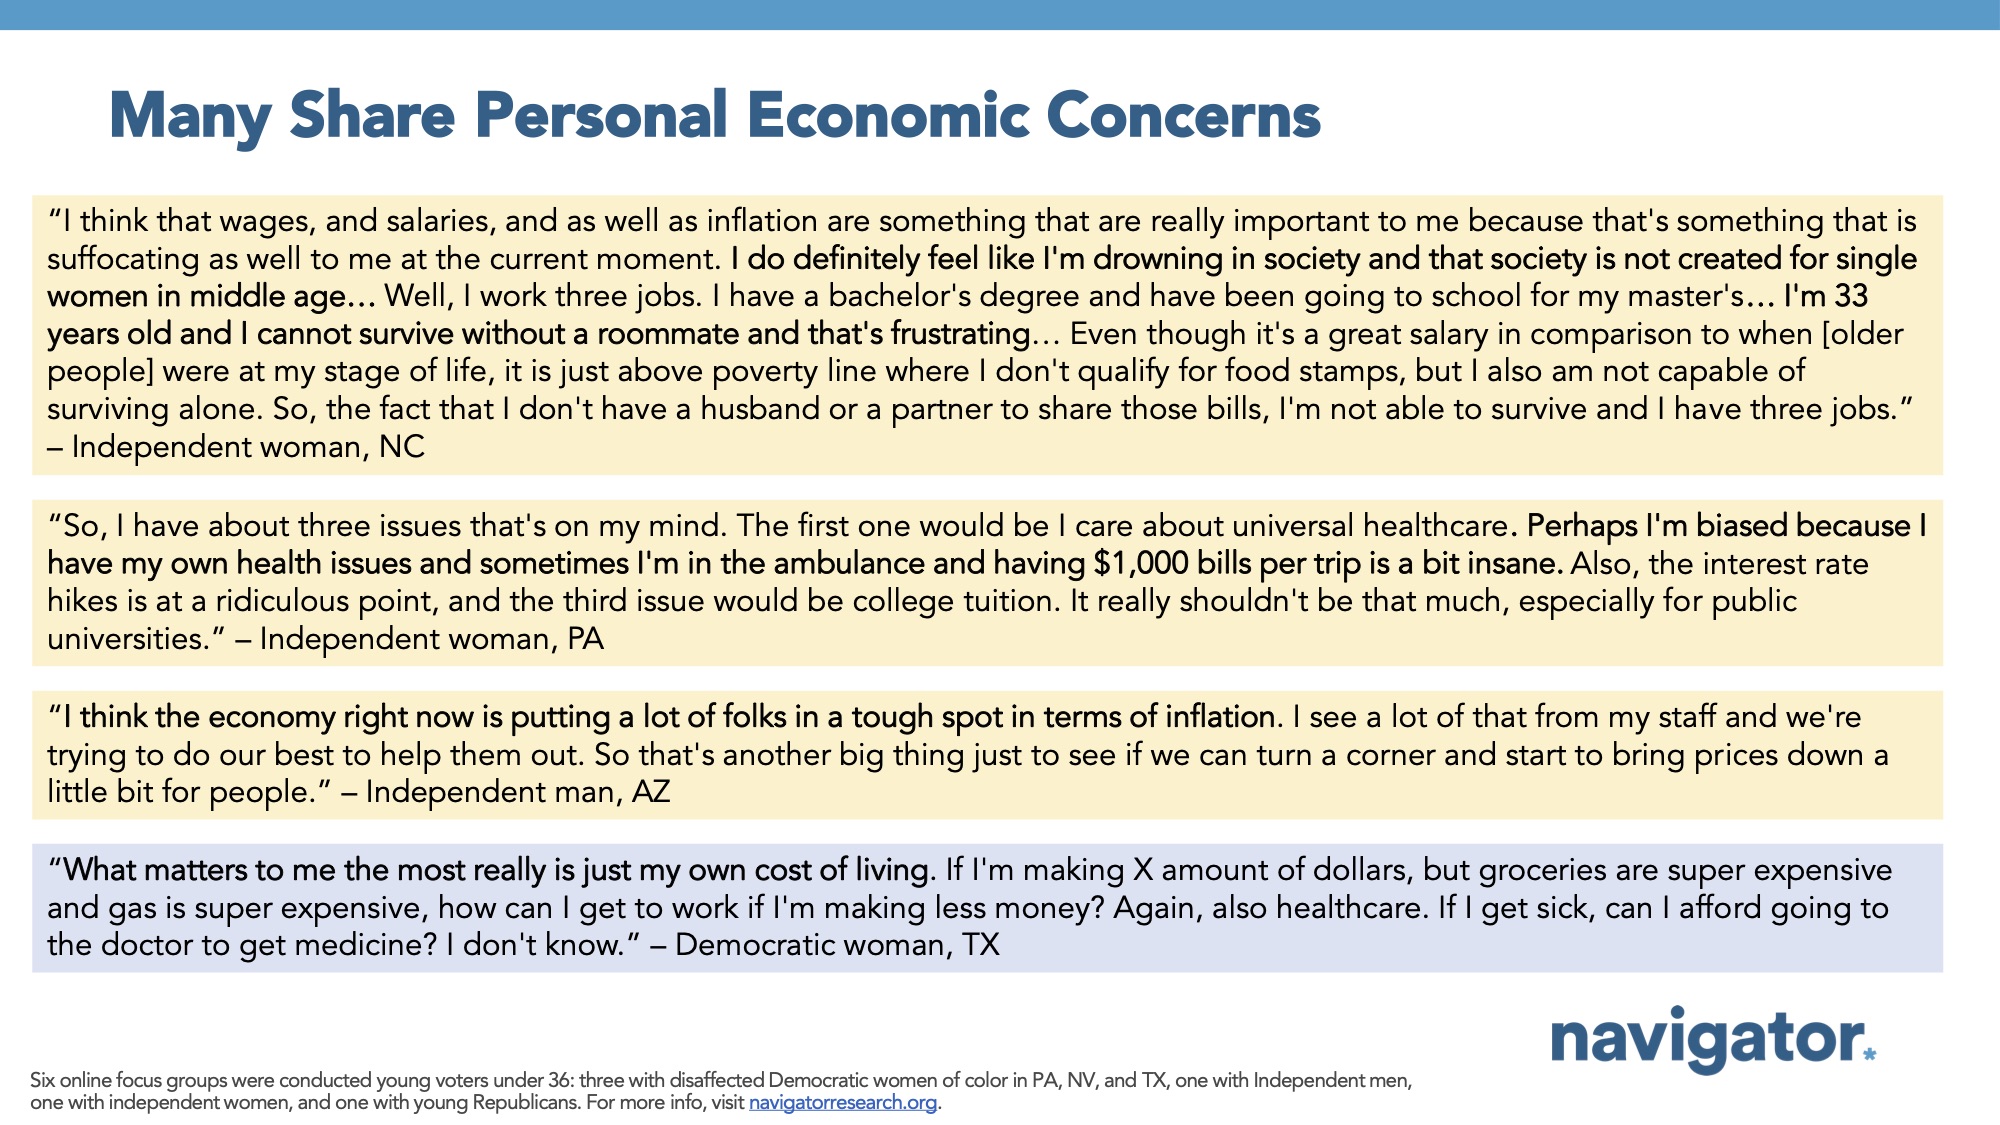 Focus group report slide titled: Many Share Personal Economic Concerns